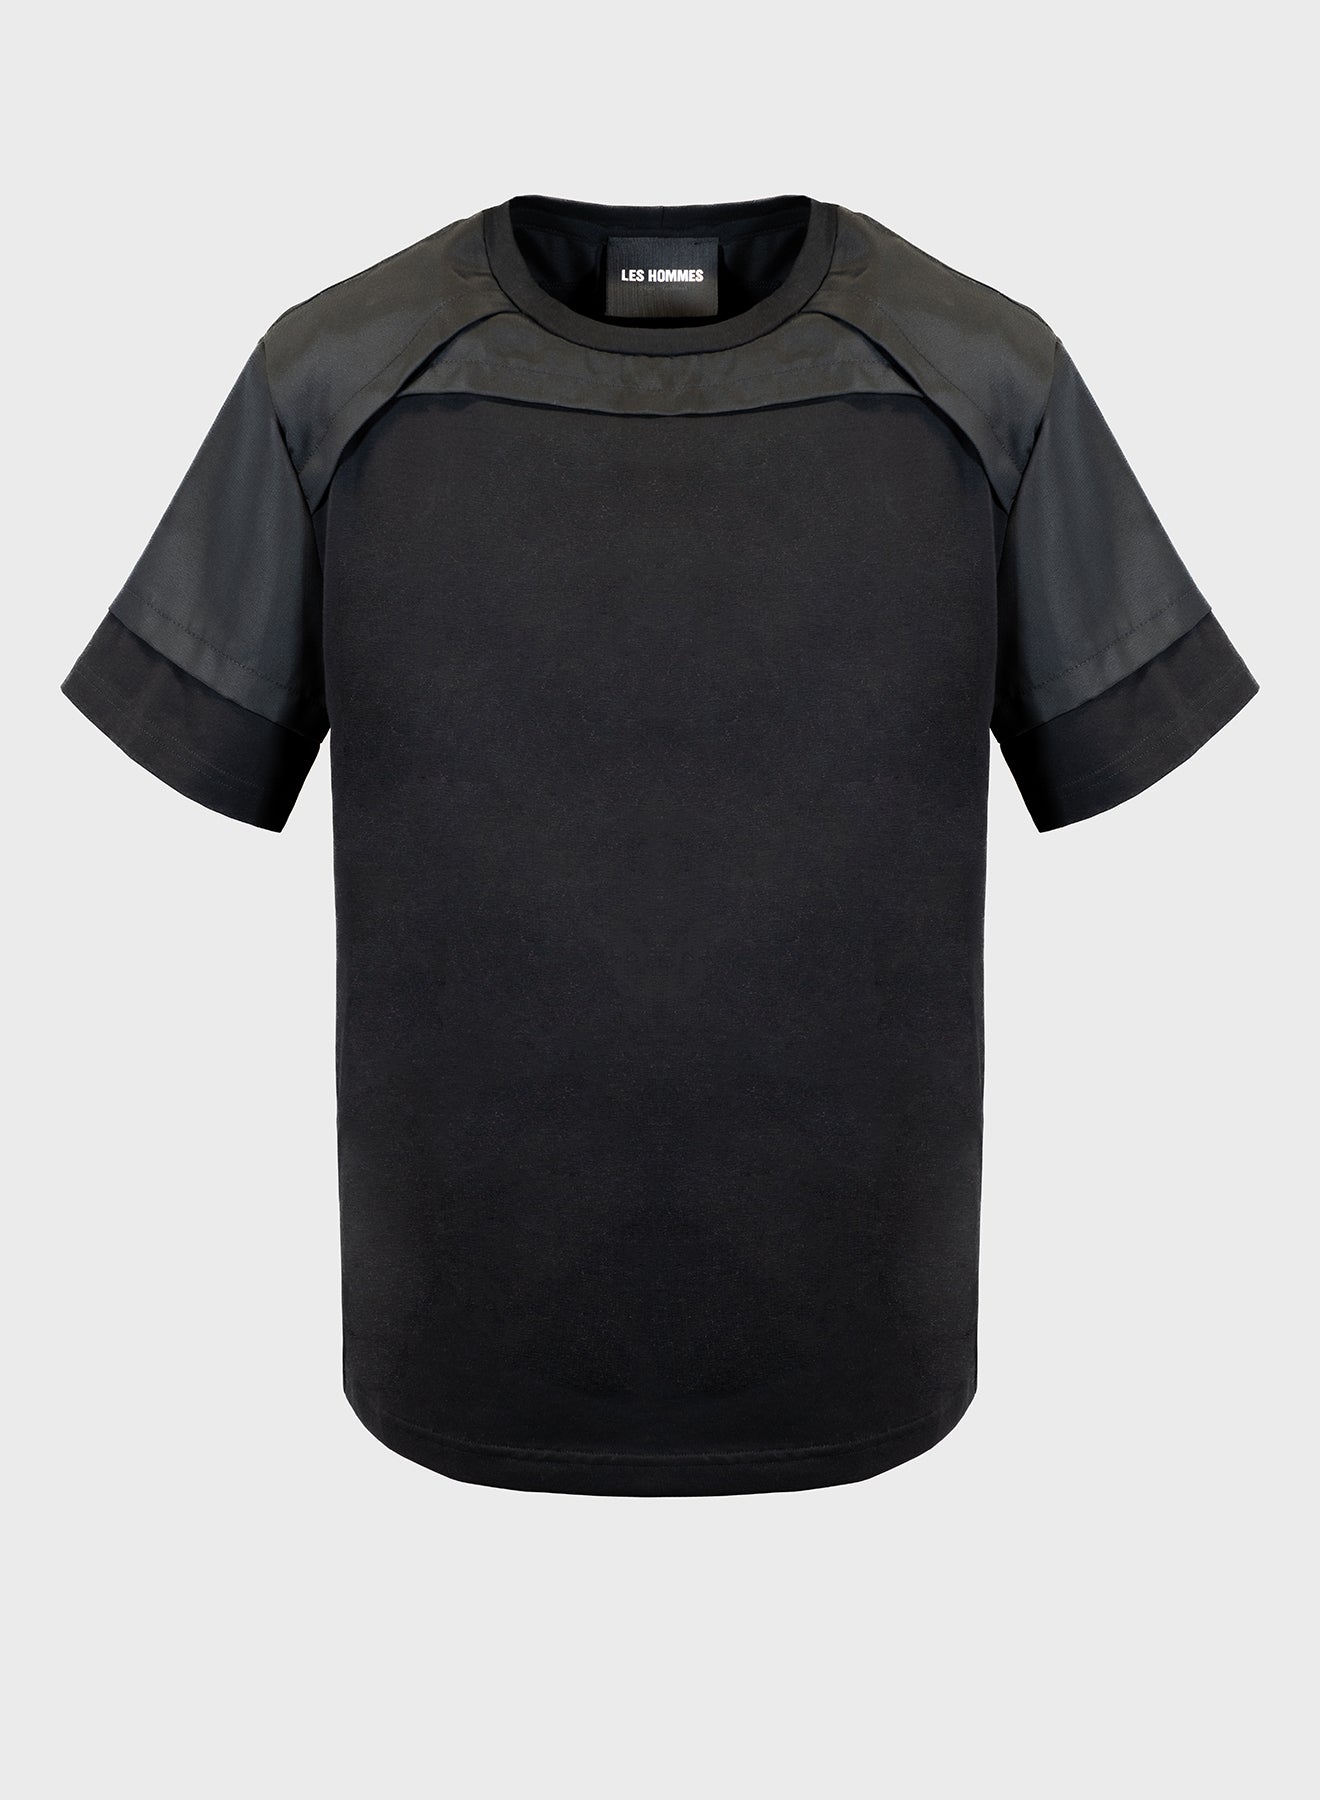 DOUBLE SLEEVES WITH NYLON T-SHIRT